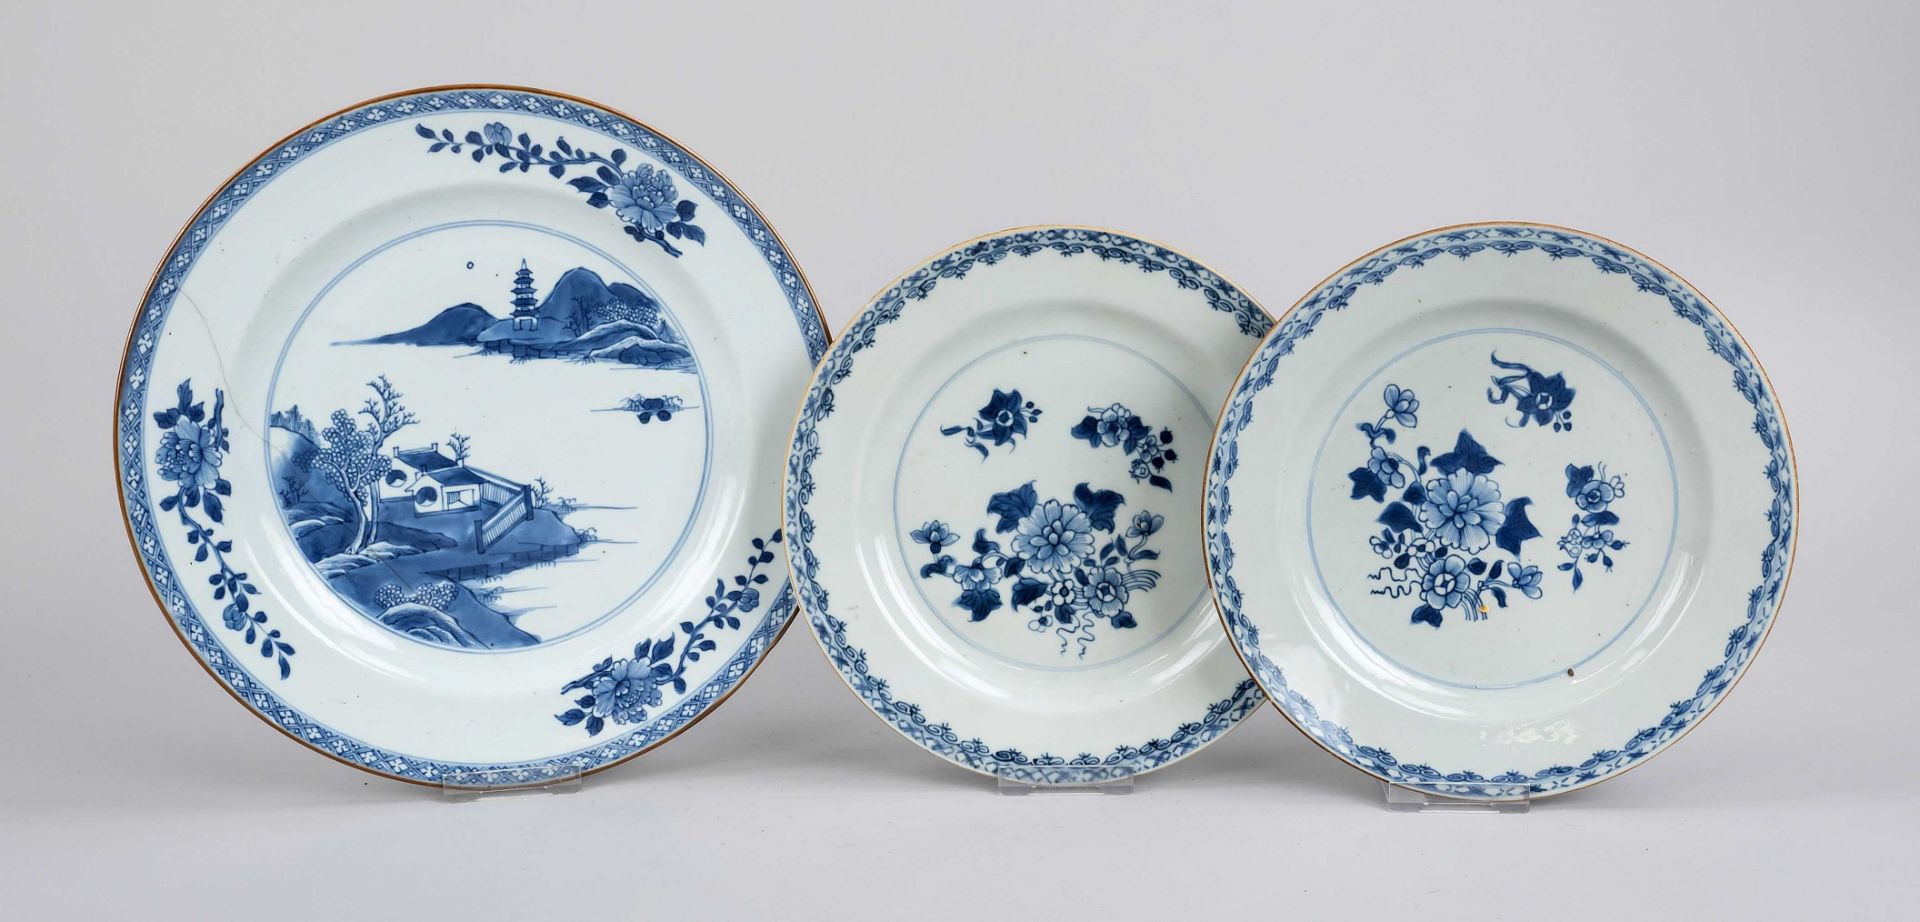 3 Chinese export plates, China, Qing dynasty(1644-1911), around 1800, porcelain with cobalt blue